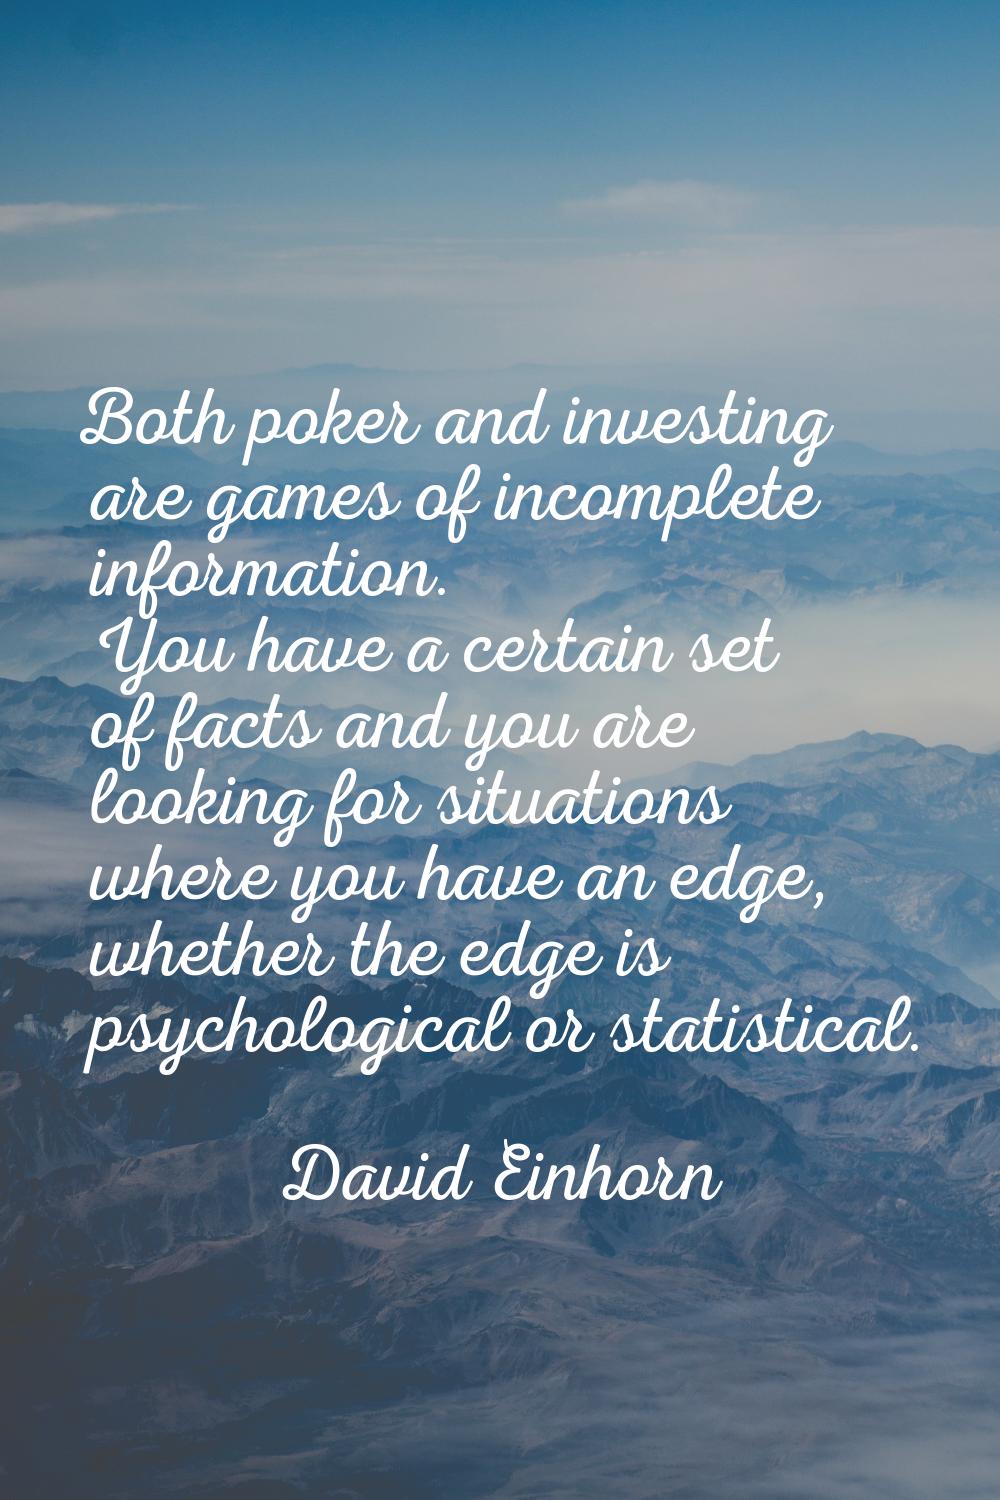 Both poker and investing are games of incomplete information. You have a certain set of facts and y